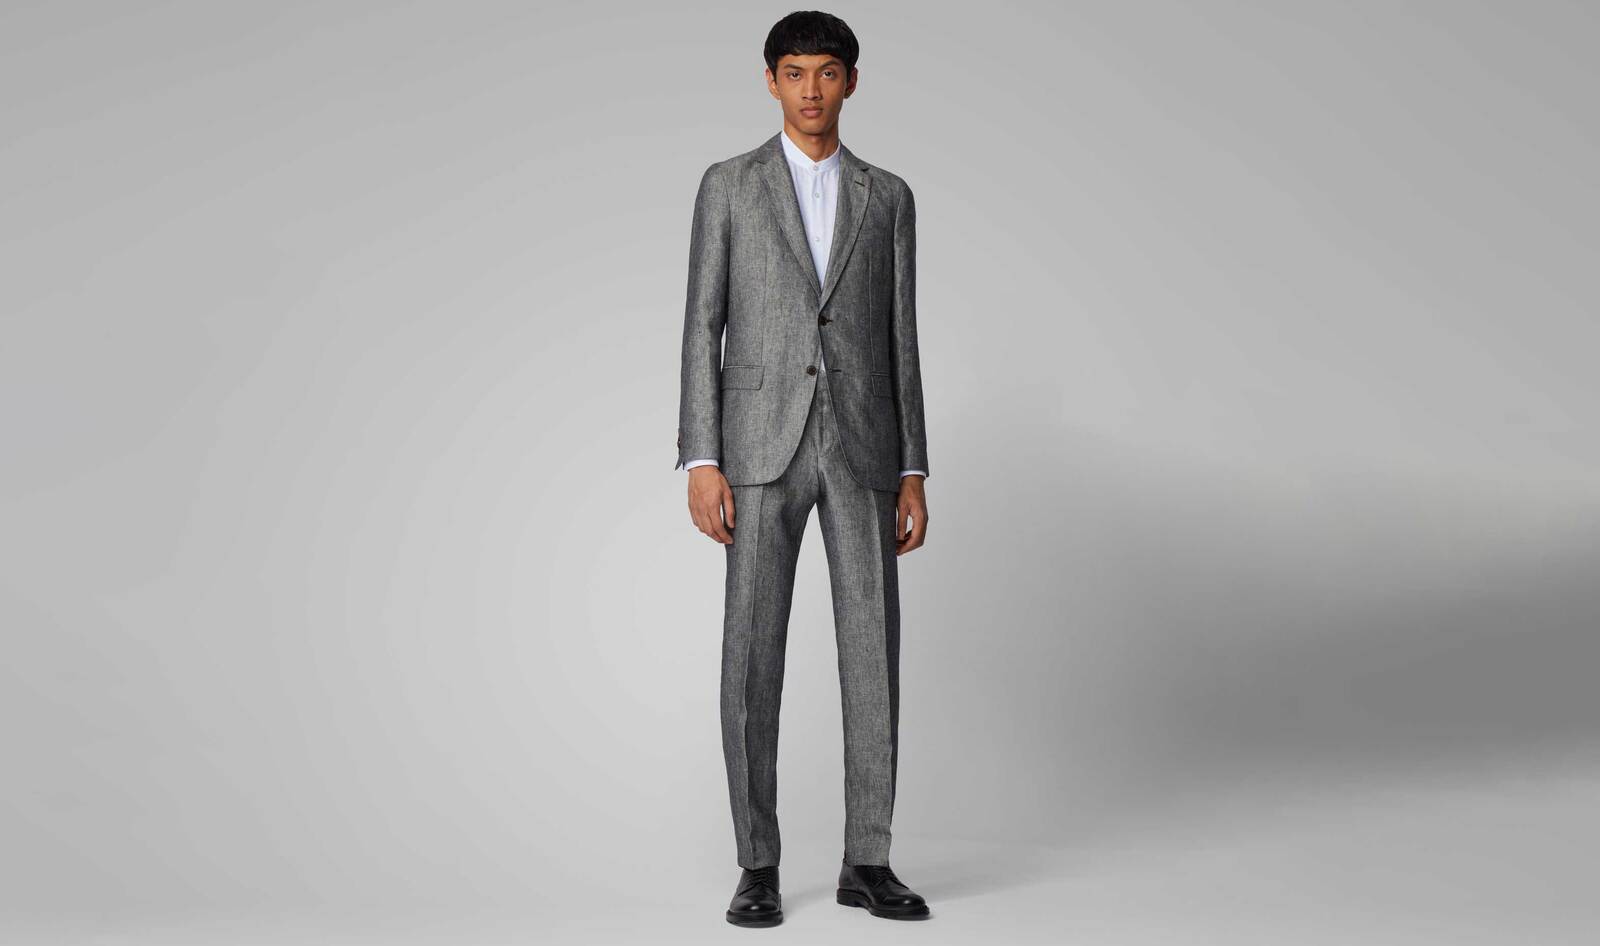 HUGO BOSS Launches Its First Vegan-Certified Suit